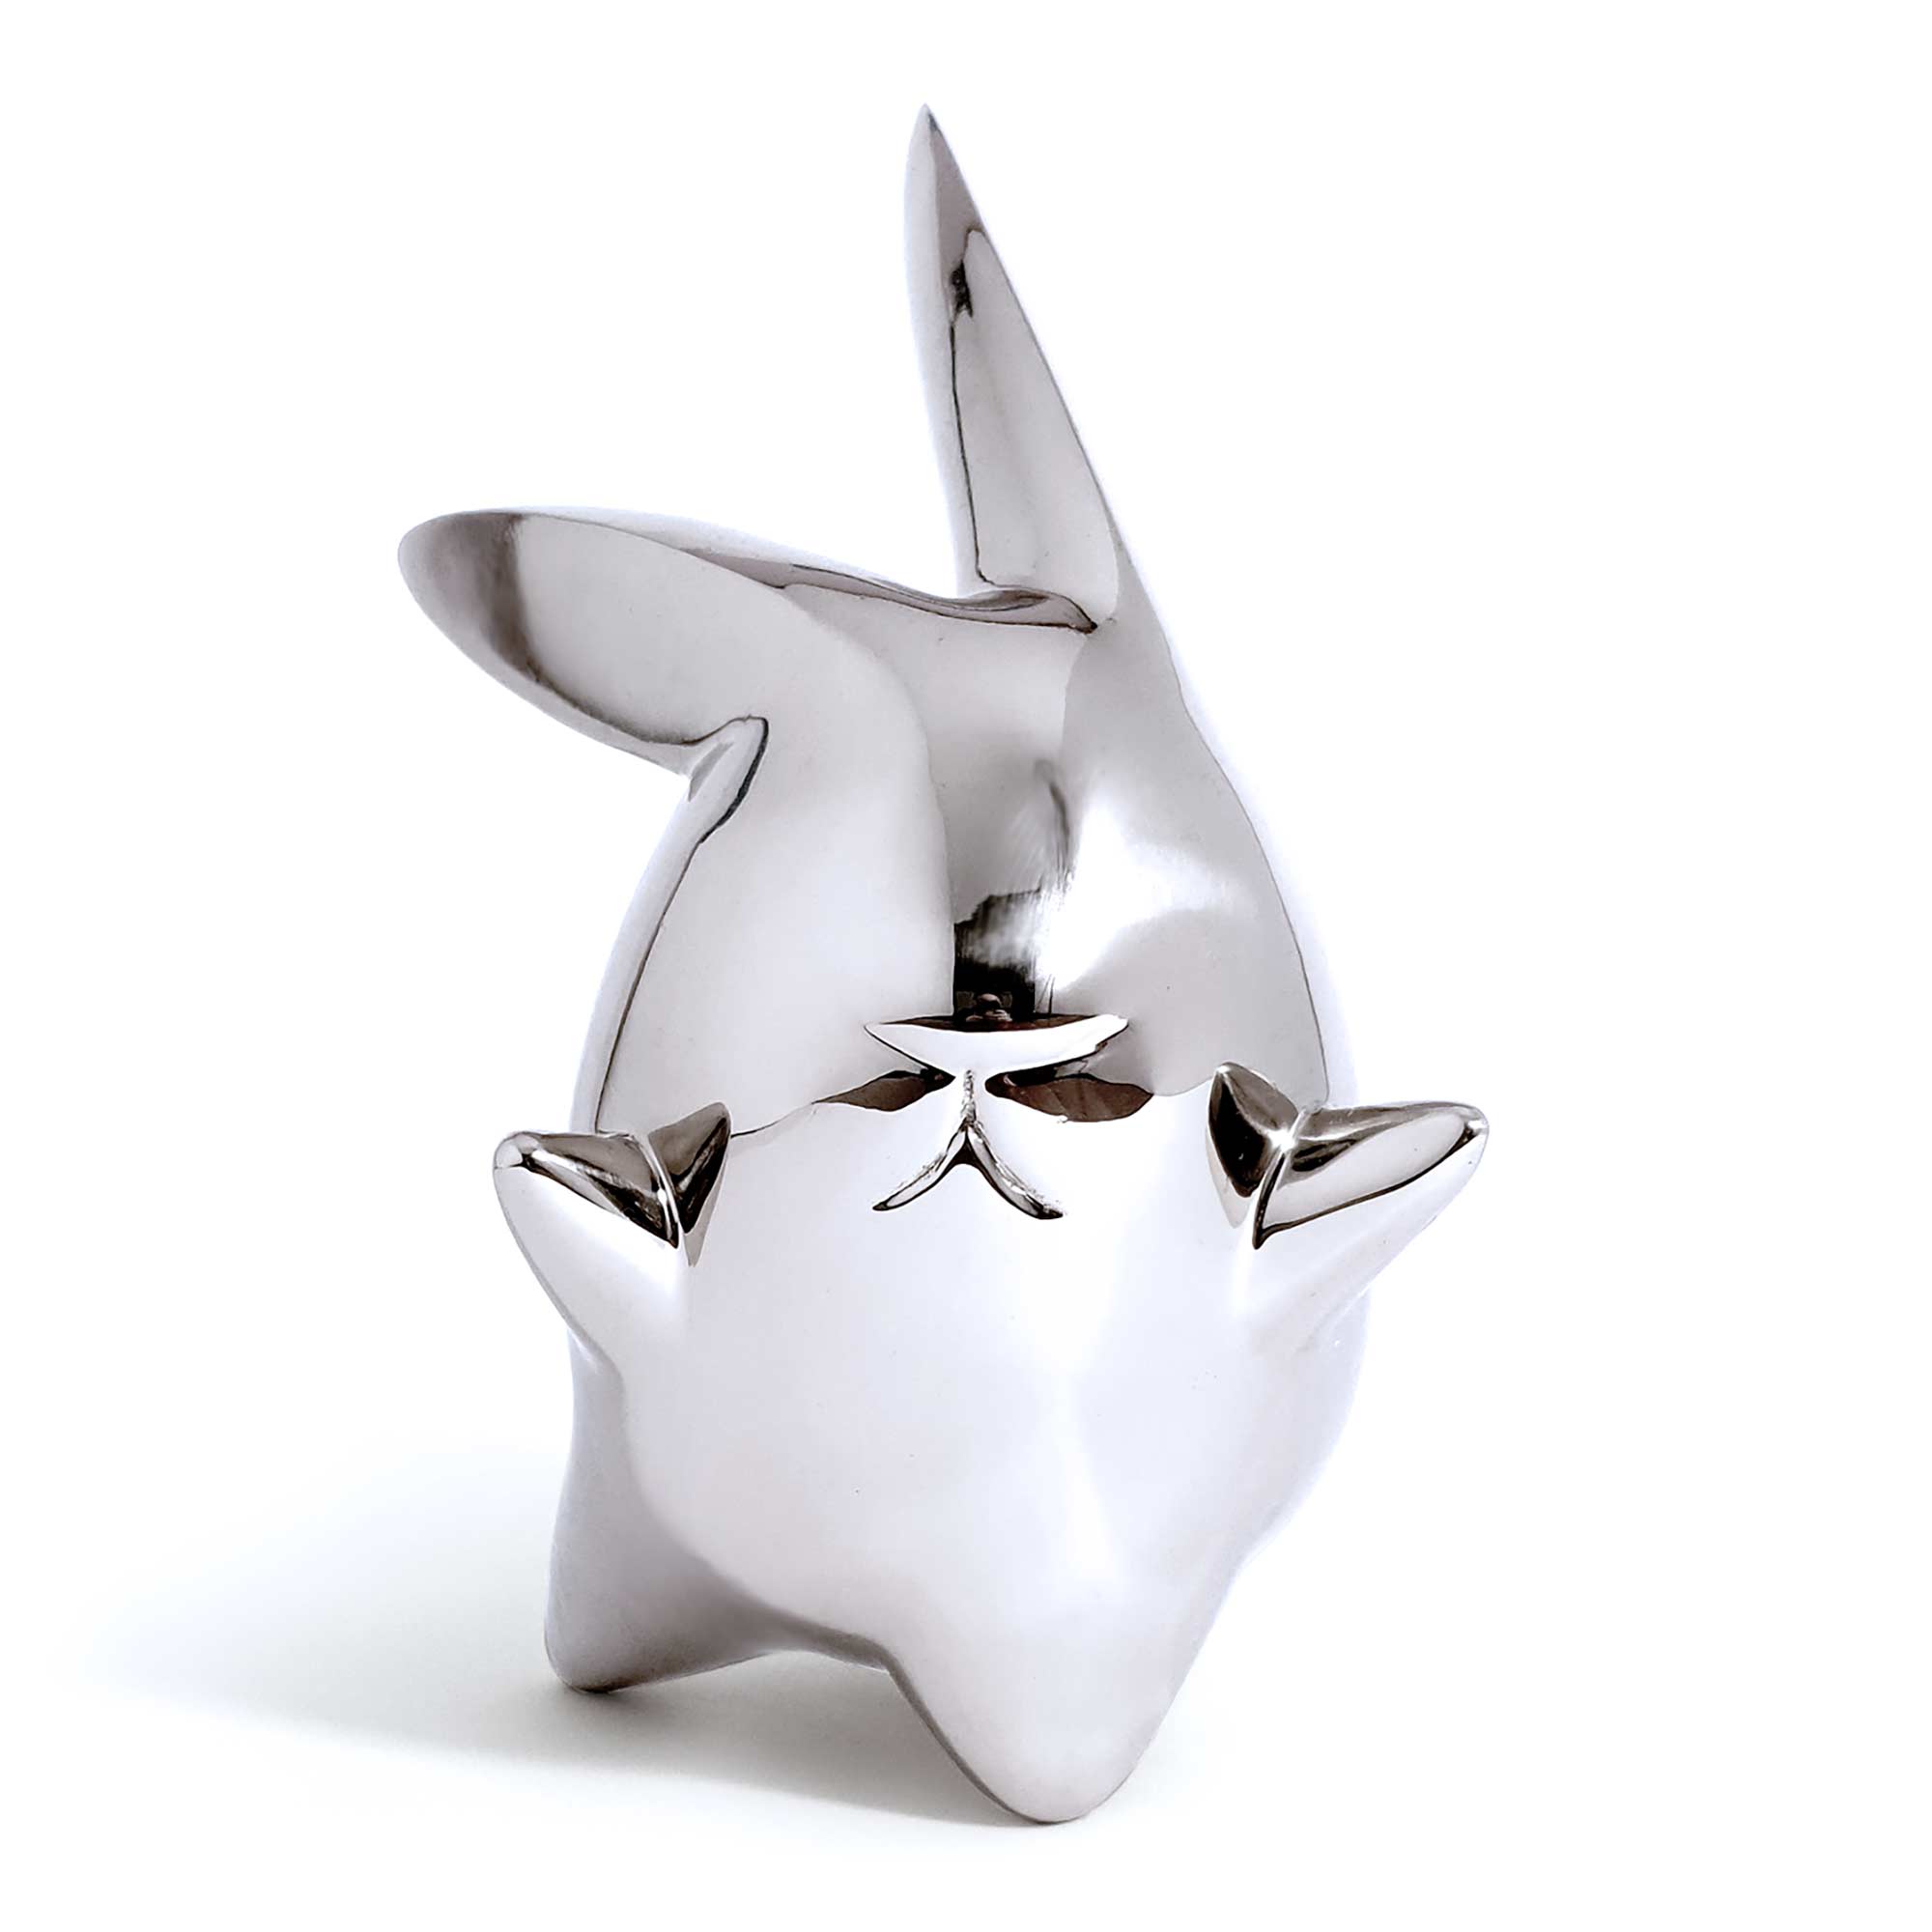 Flight or Fight, bunny rabbit sculpture, Mirror Polished Stainless Steel Sculpture, by artist Ferdi B Dick, front view